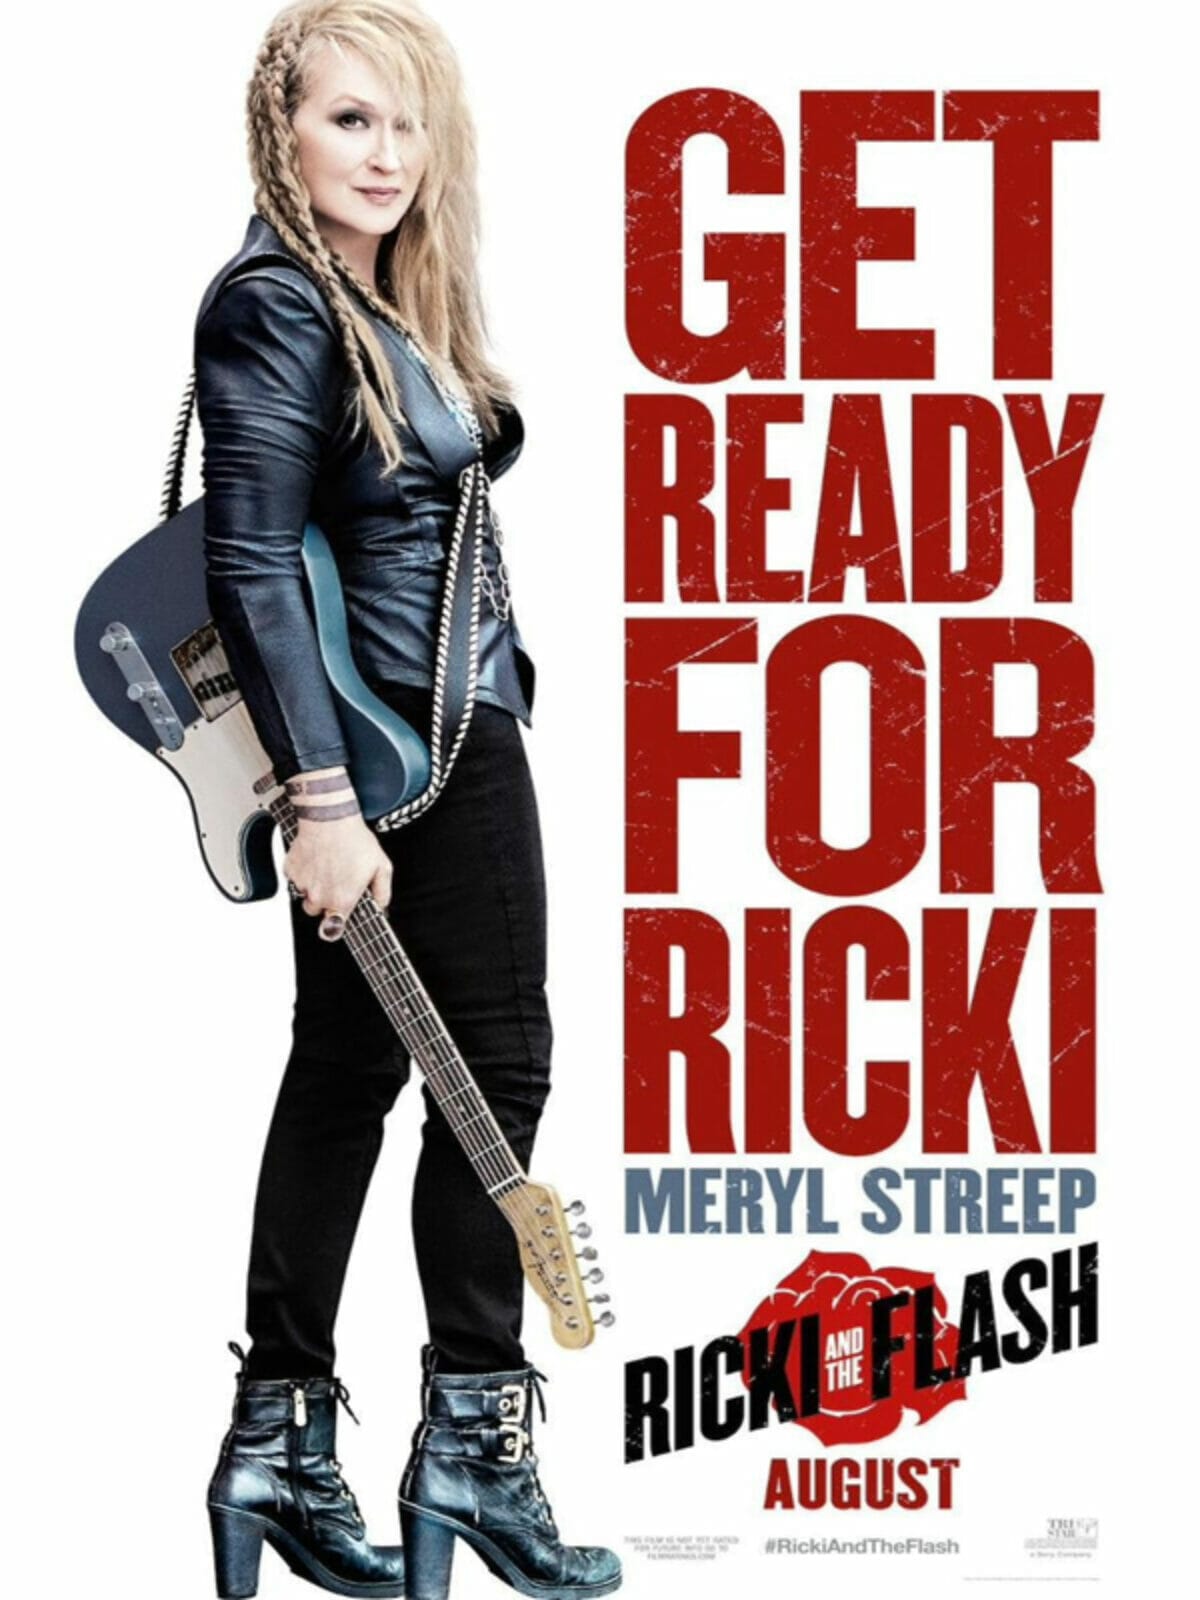 Ricki-and-the-flash-poster-teaser